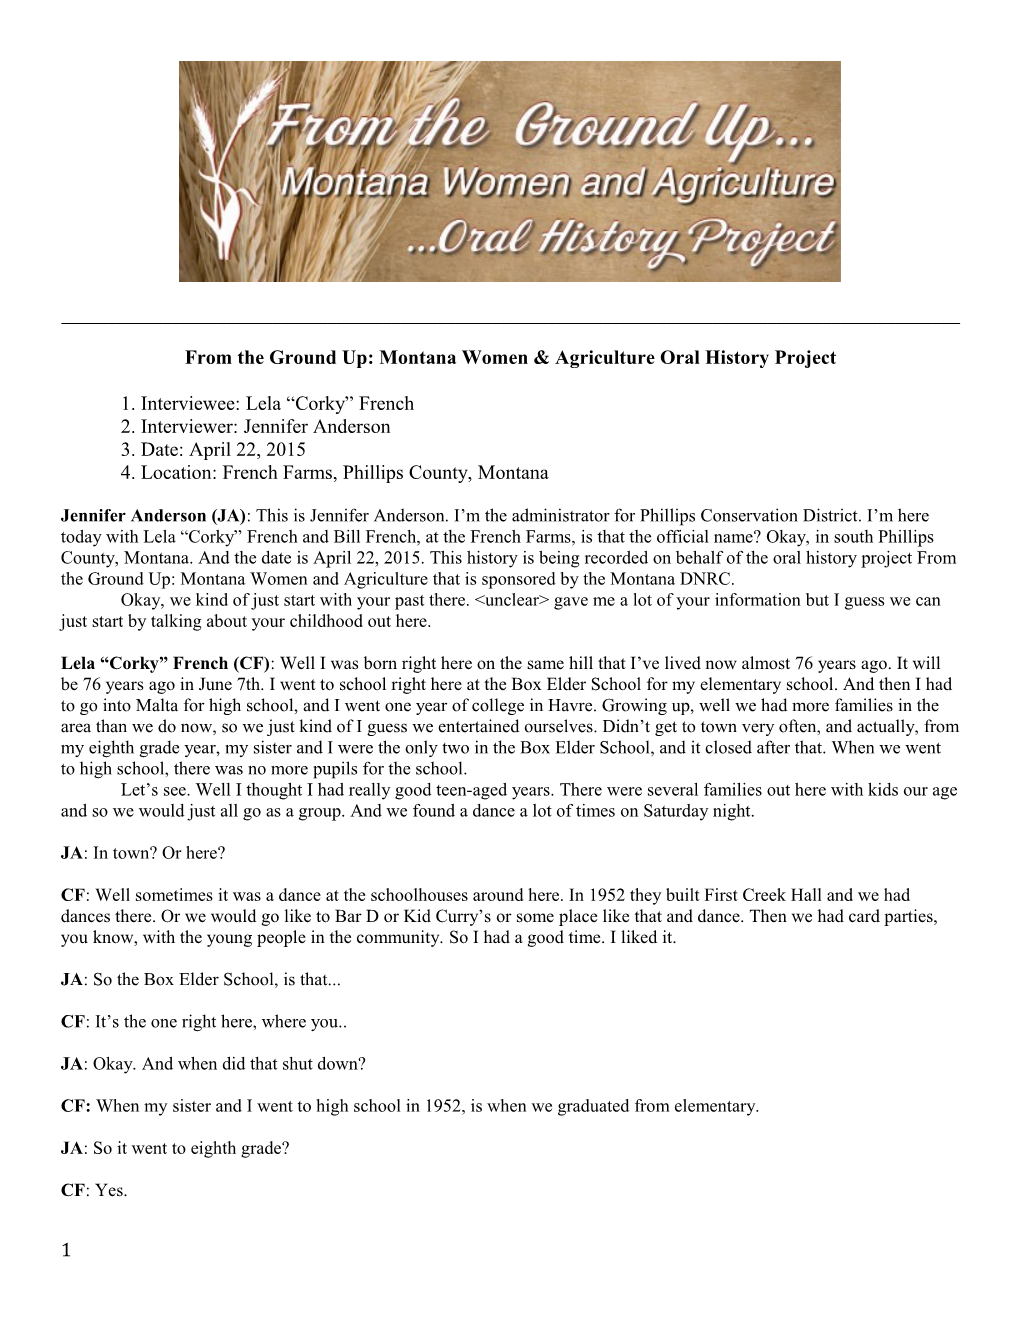 From the Ground Up: Montana Women & Agriculture Oral History Project